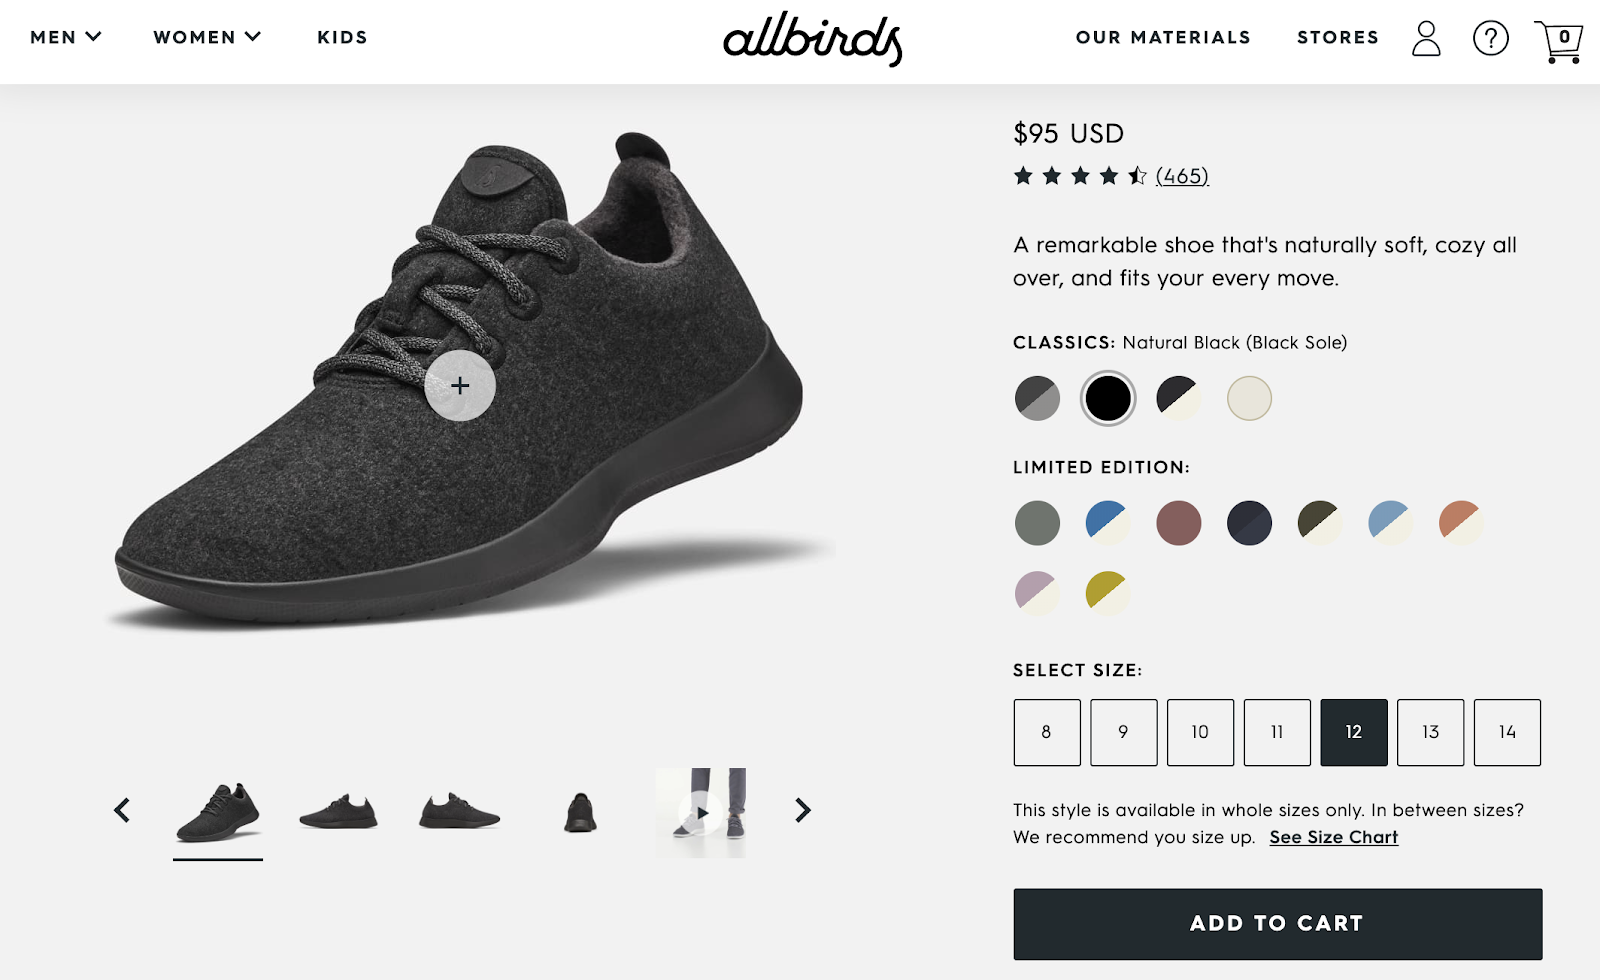 Screenshot of Allbirds product page focused on adding something to a basket